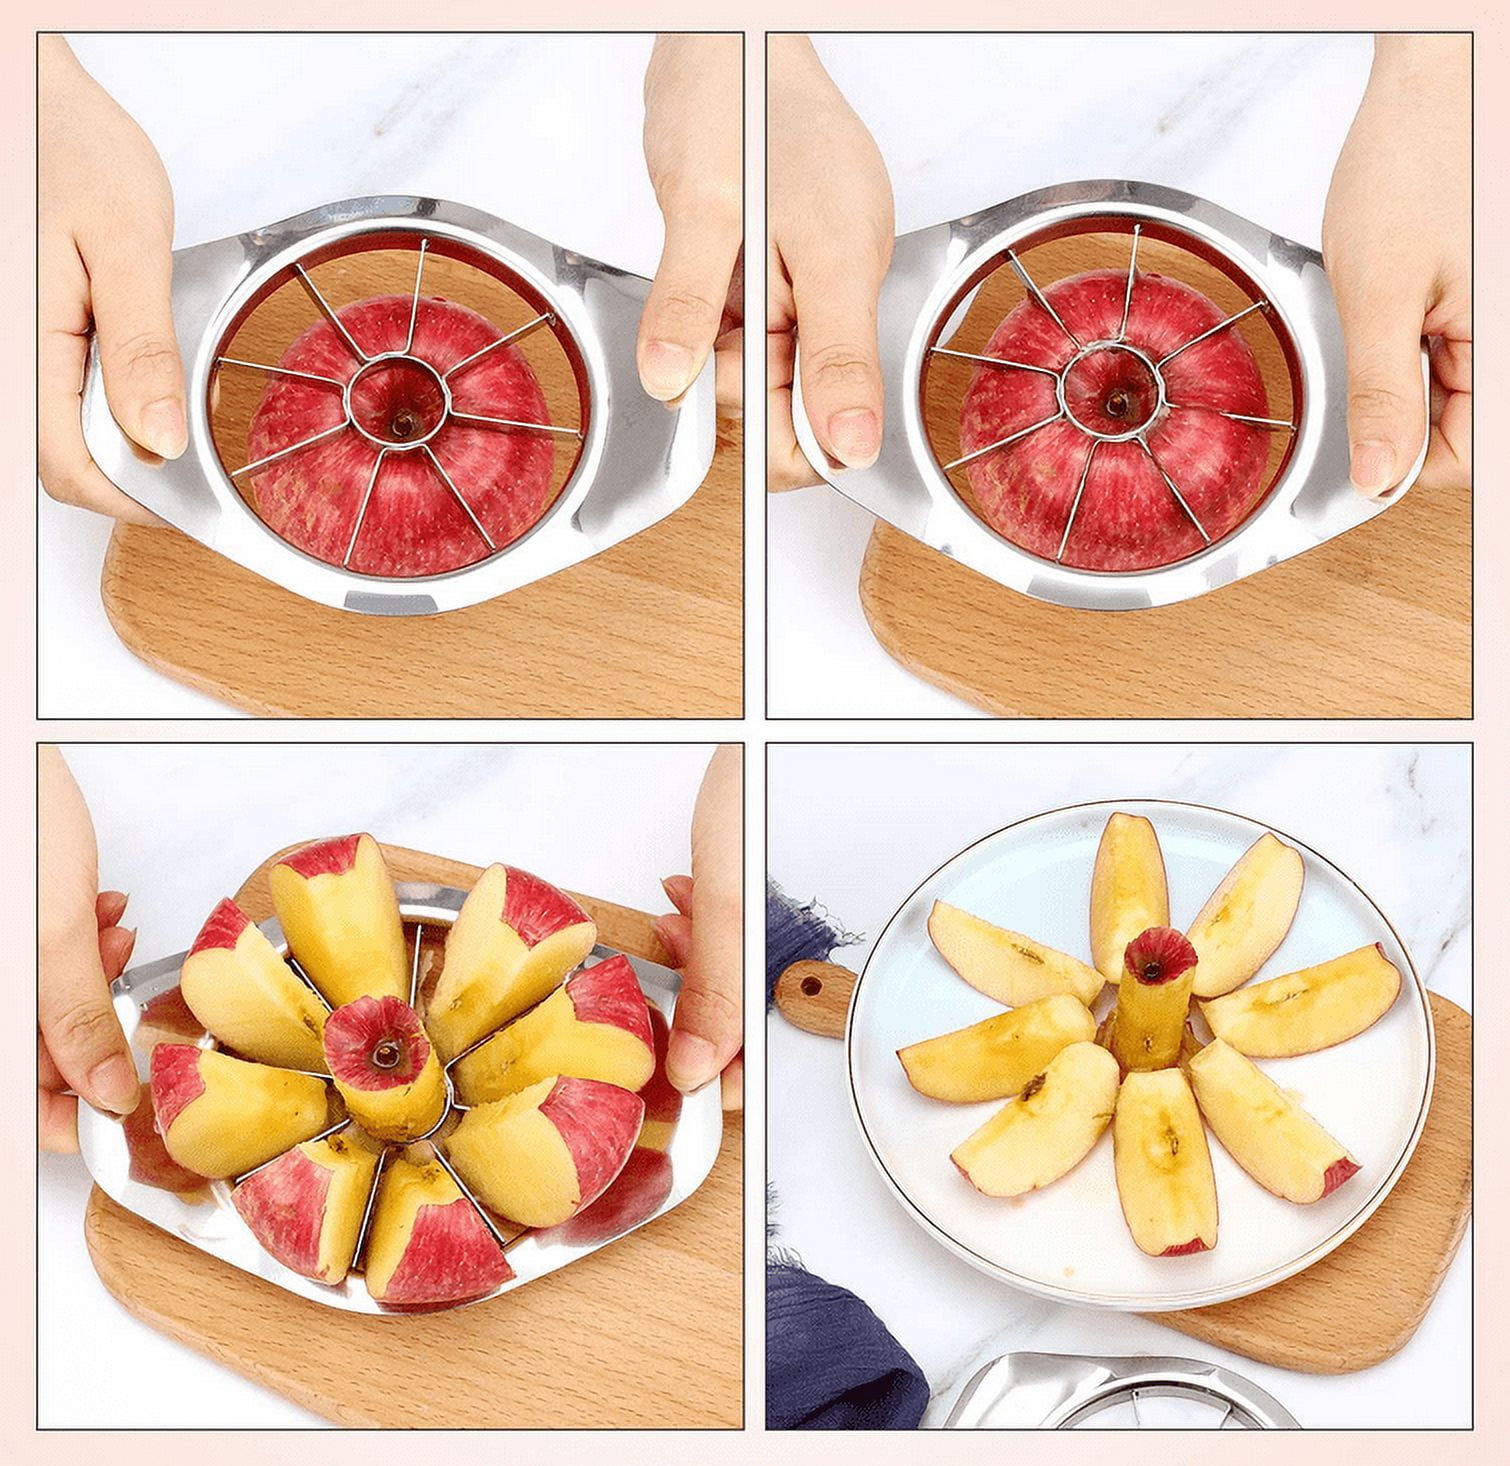 Apple Slicer Cutter, Pitter, Divider 8-Blade 304 Stainless Steel Fruit Cutter for Up to 4 Inches Apple, Silver